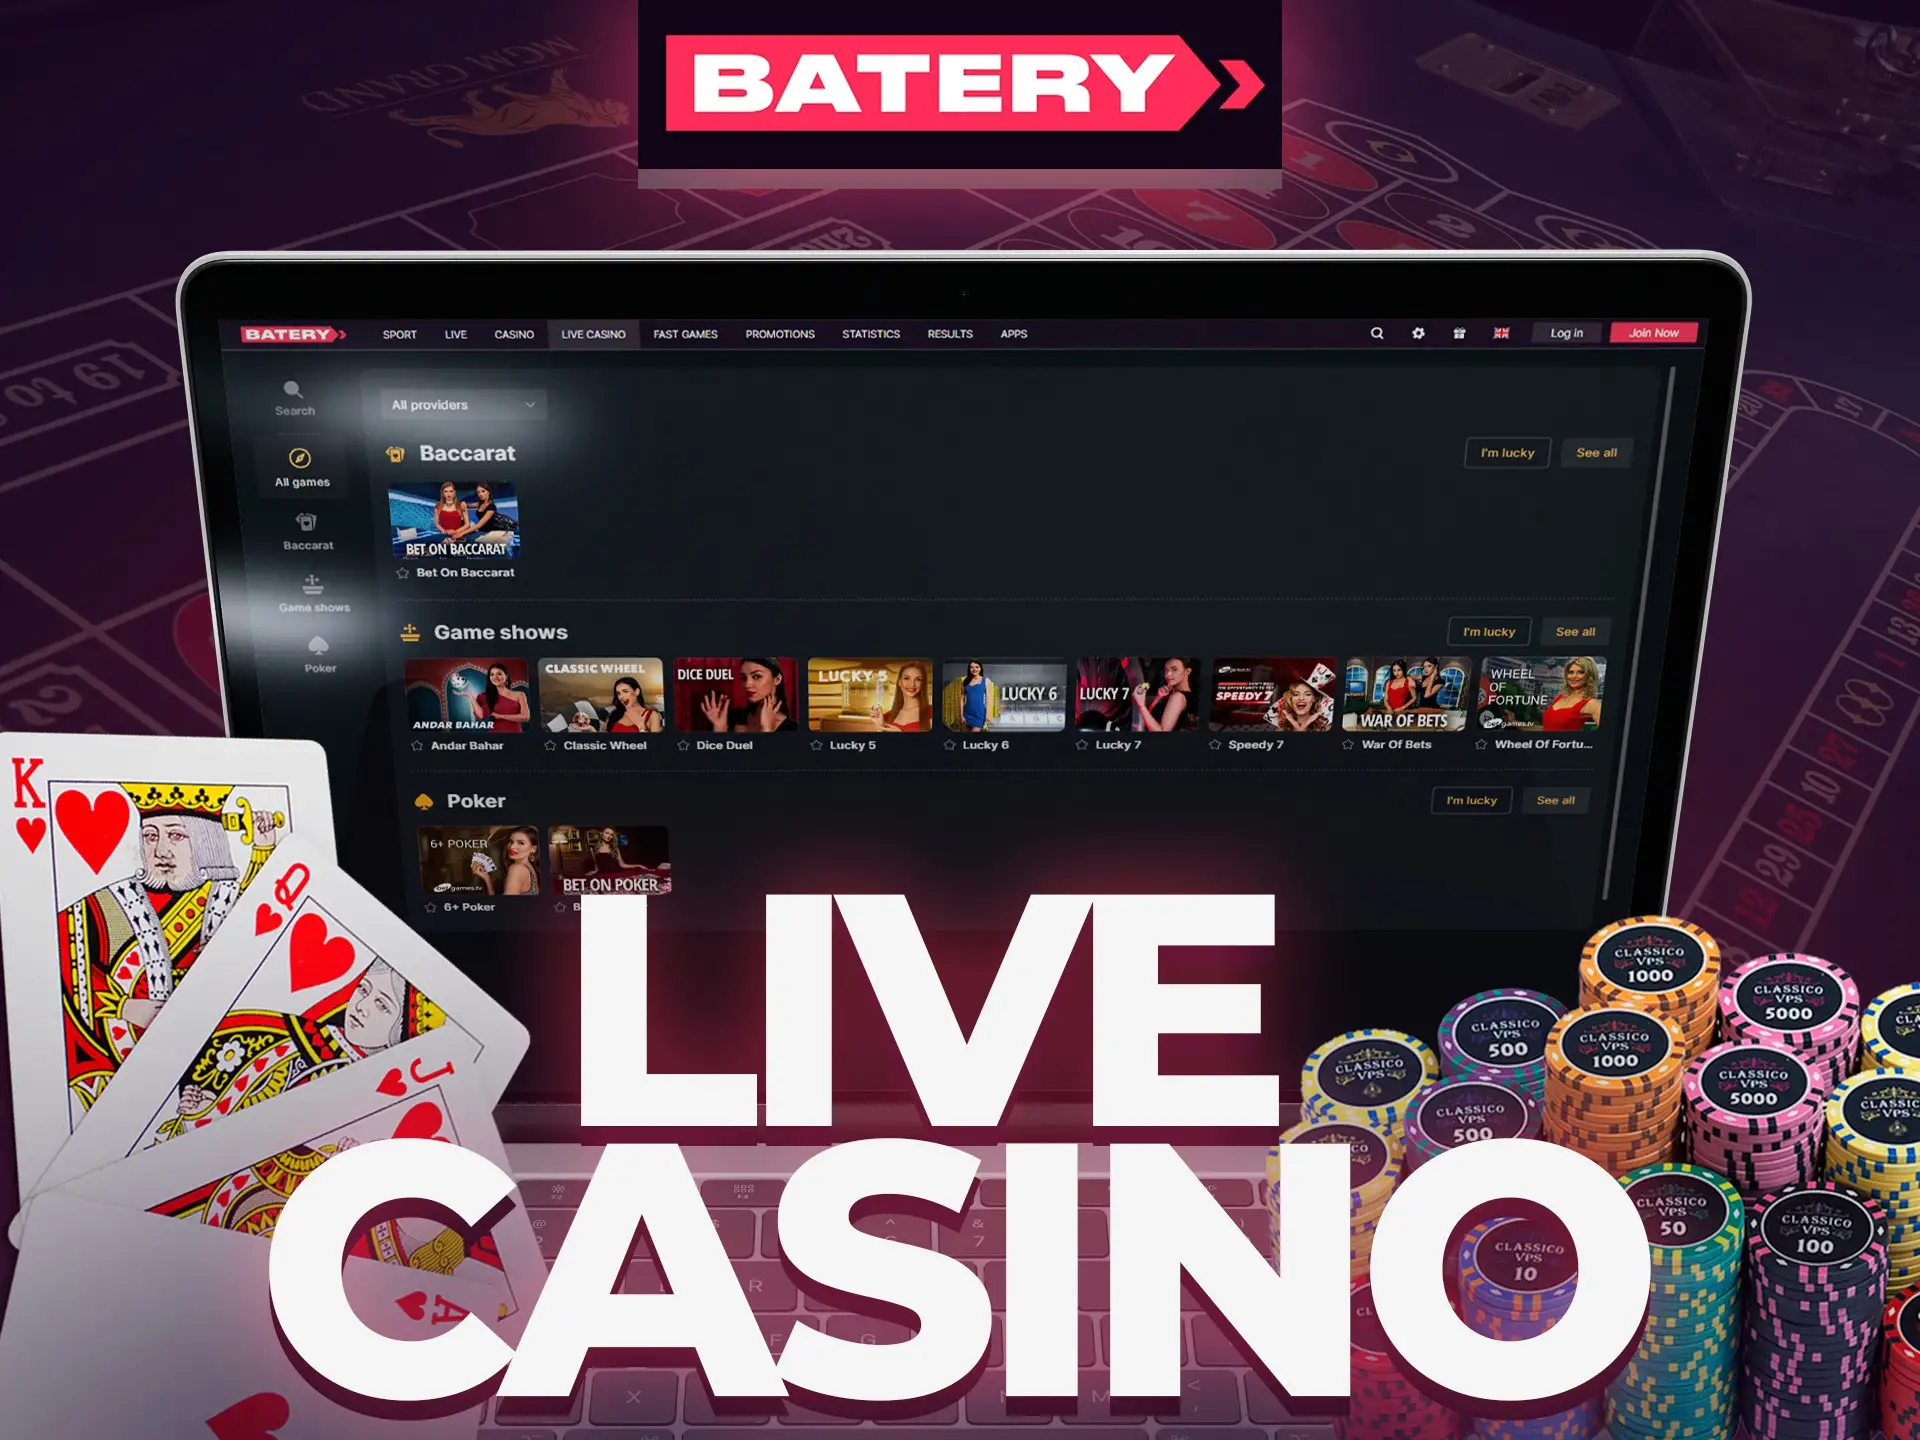 Play casino games with real people at Batery live casino.